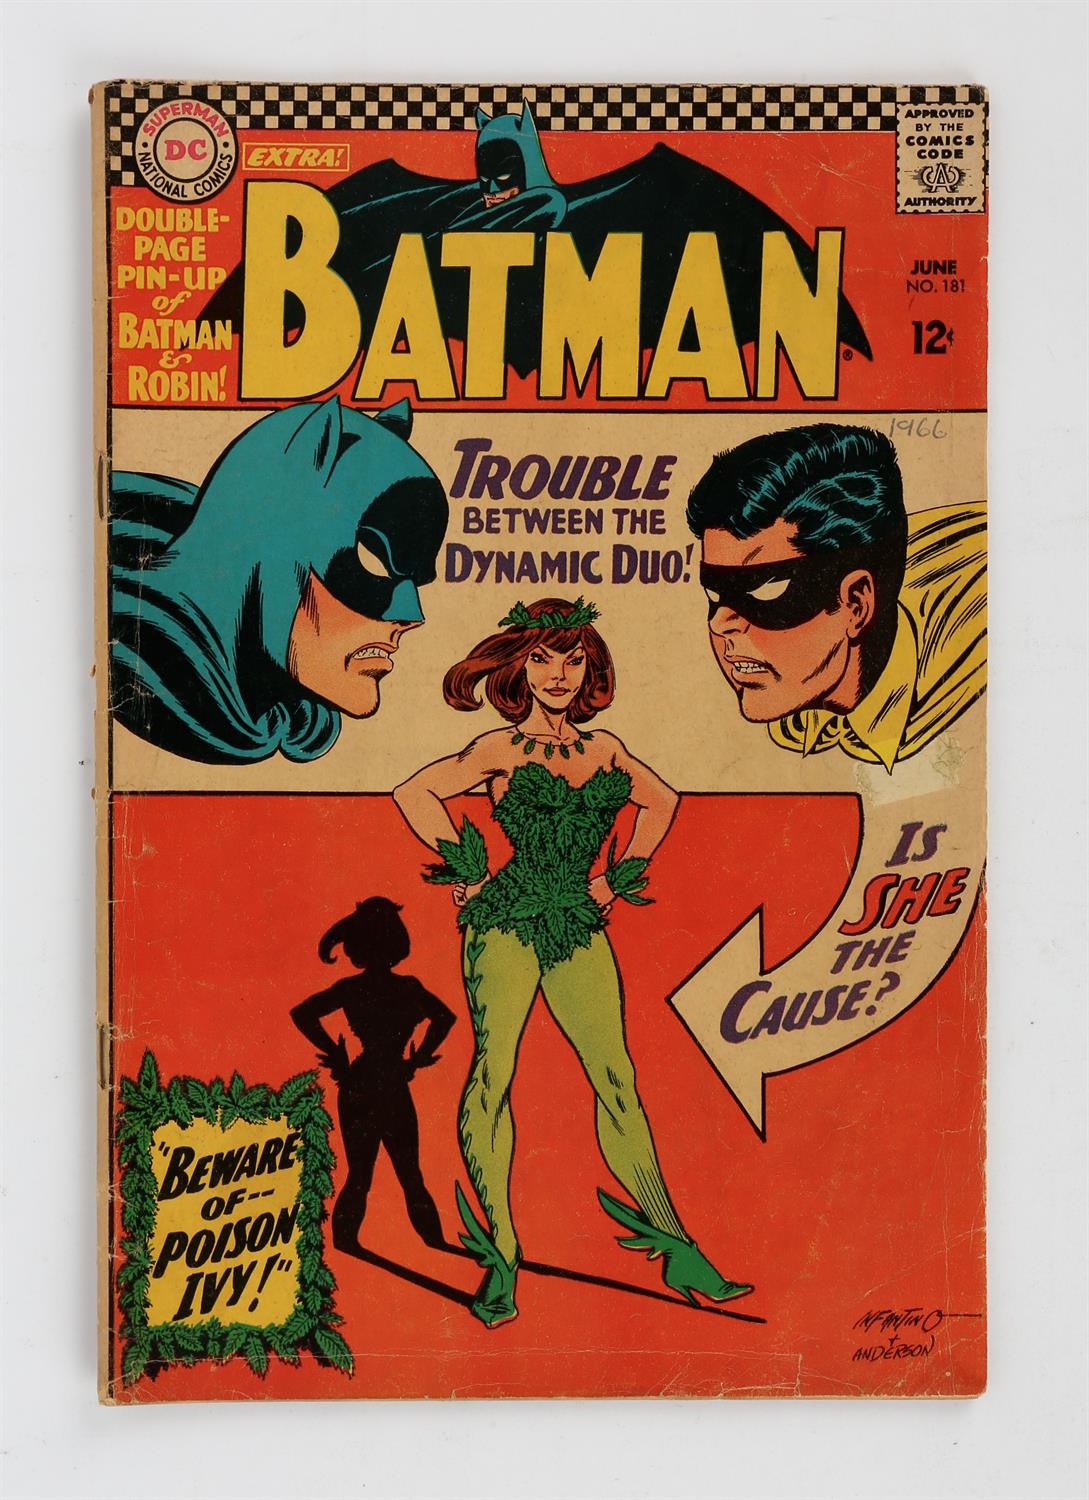 DC Comics: Batman No. 181 featuring the 1st appearance of Poison Ivy (1966). This lot